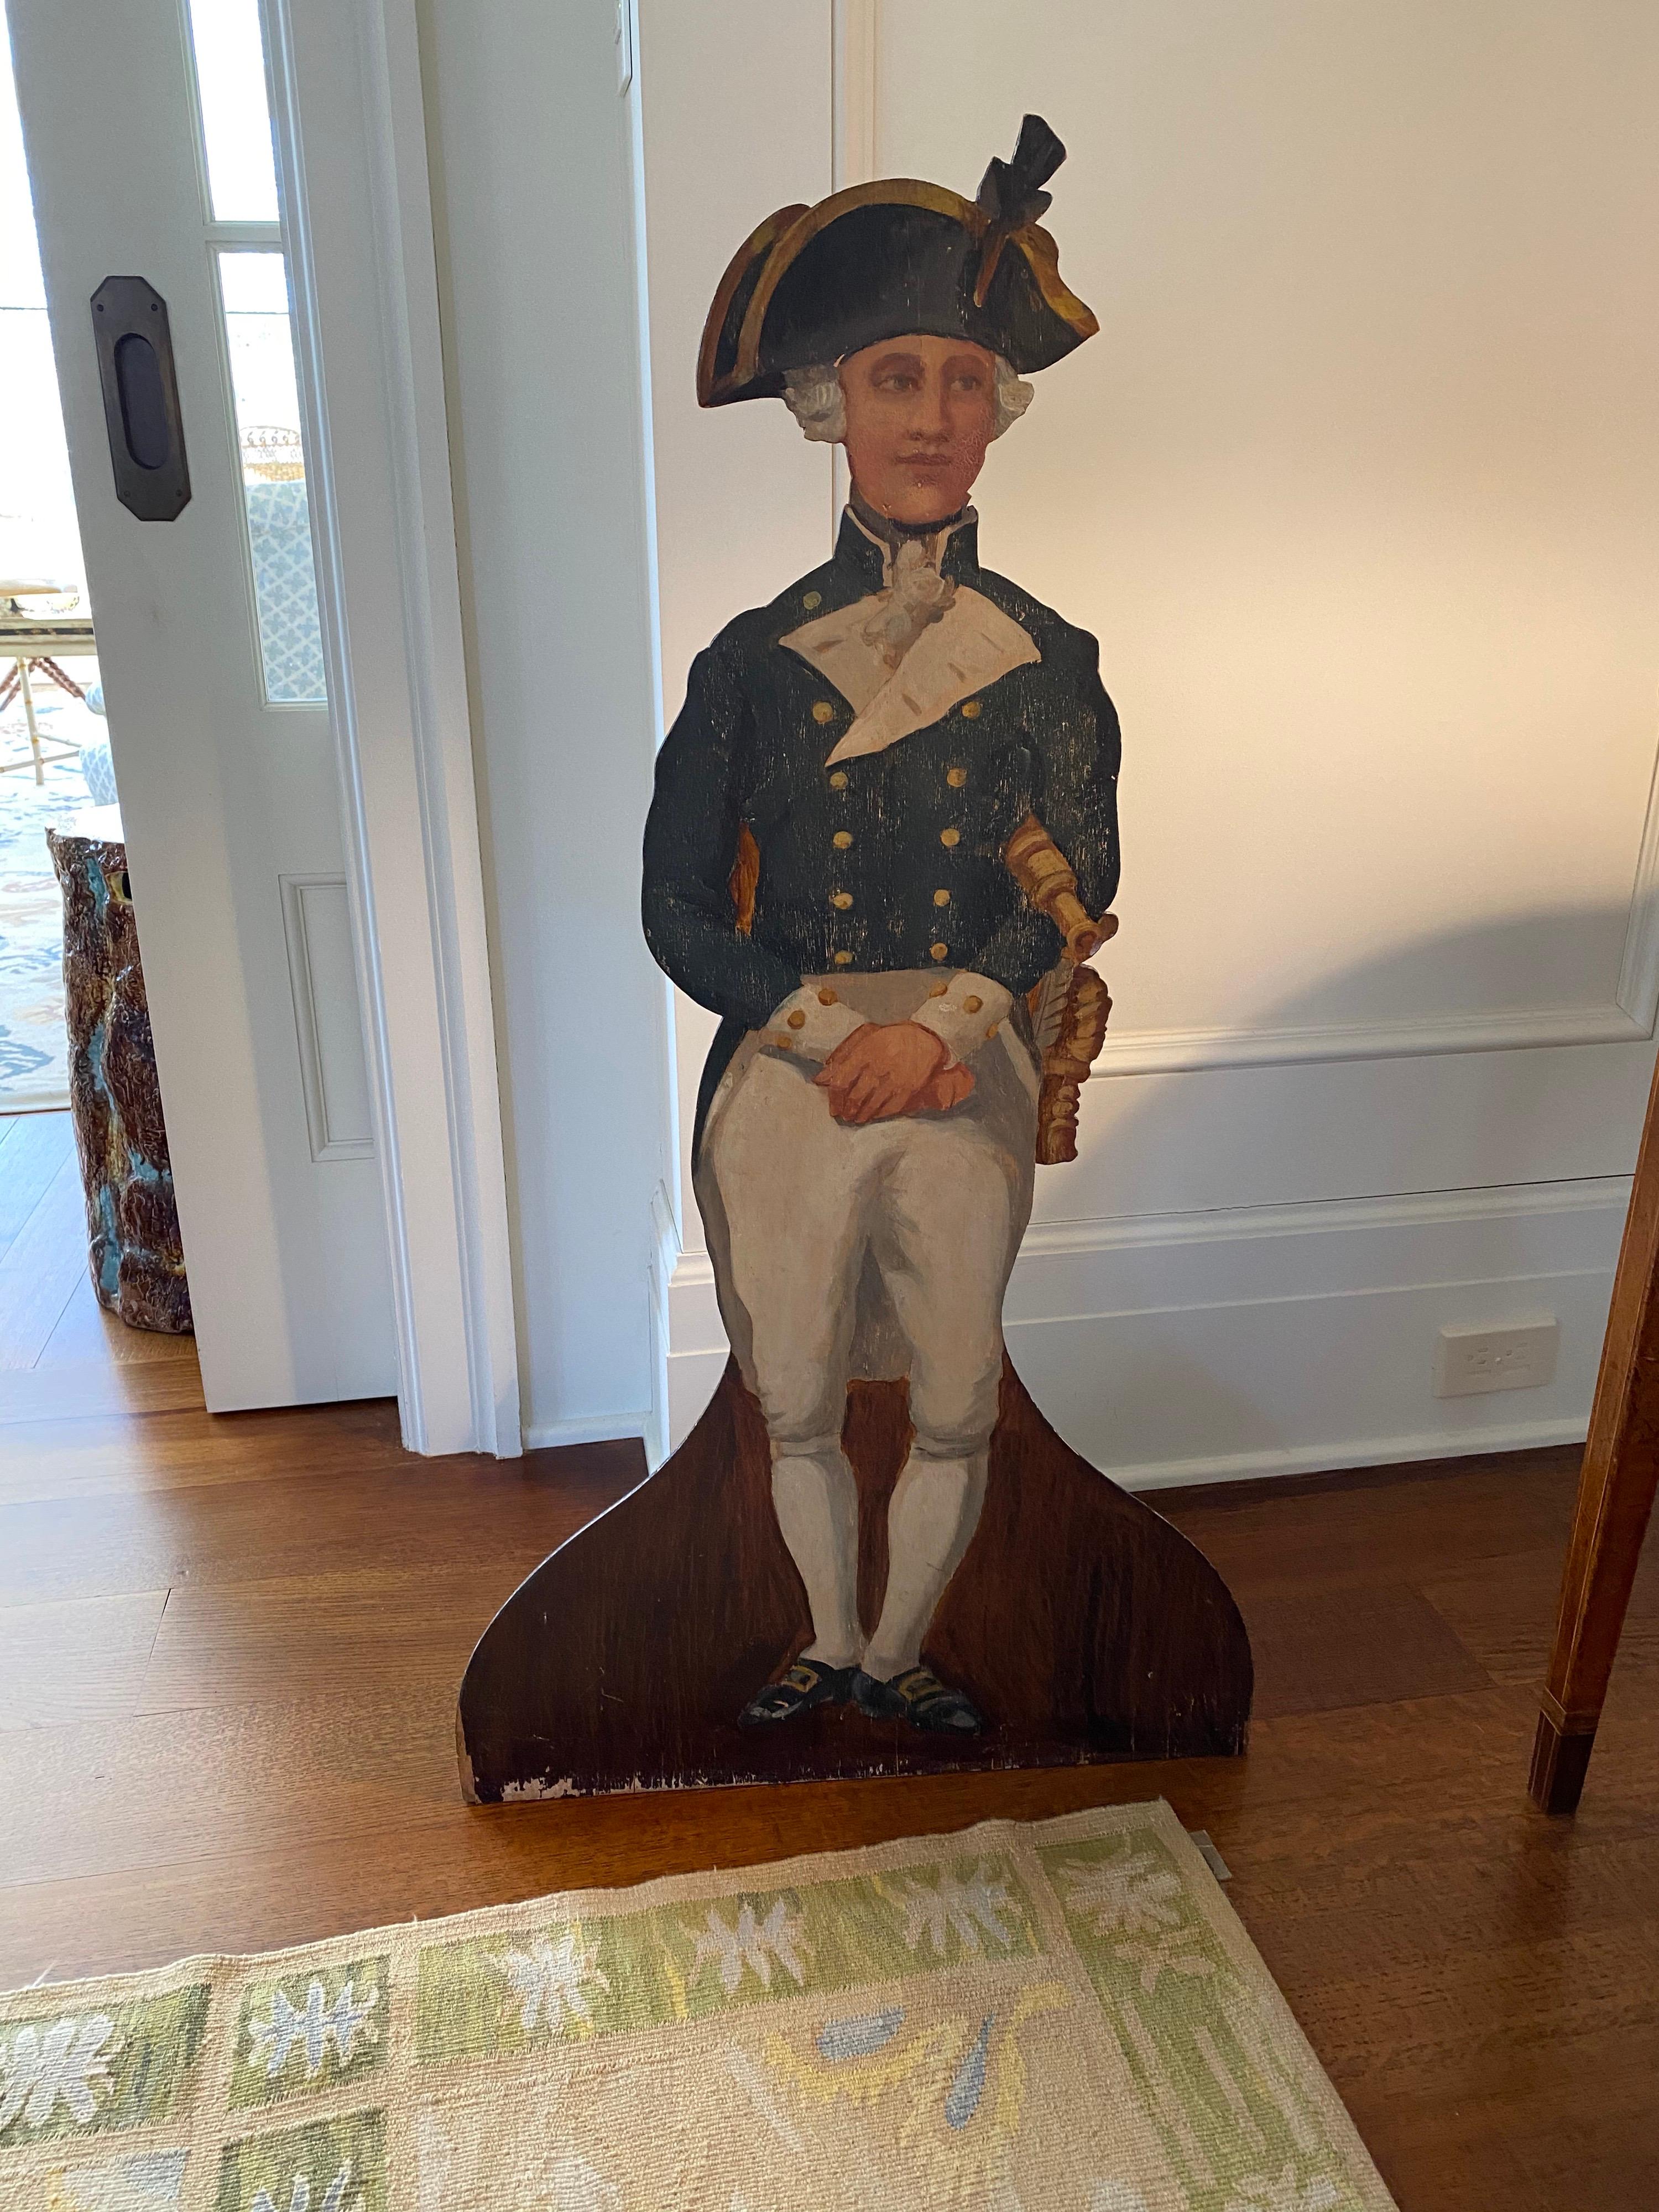 English painted wood dummy board depicting a royal navy lieutenant.
Inscribed 'Made in England' on the reverse.
Measures: 41